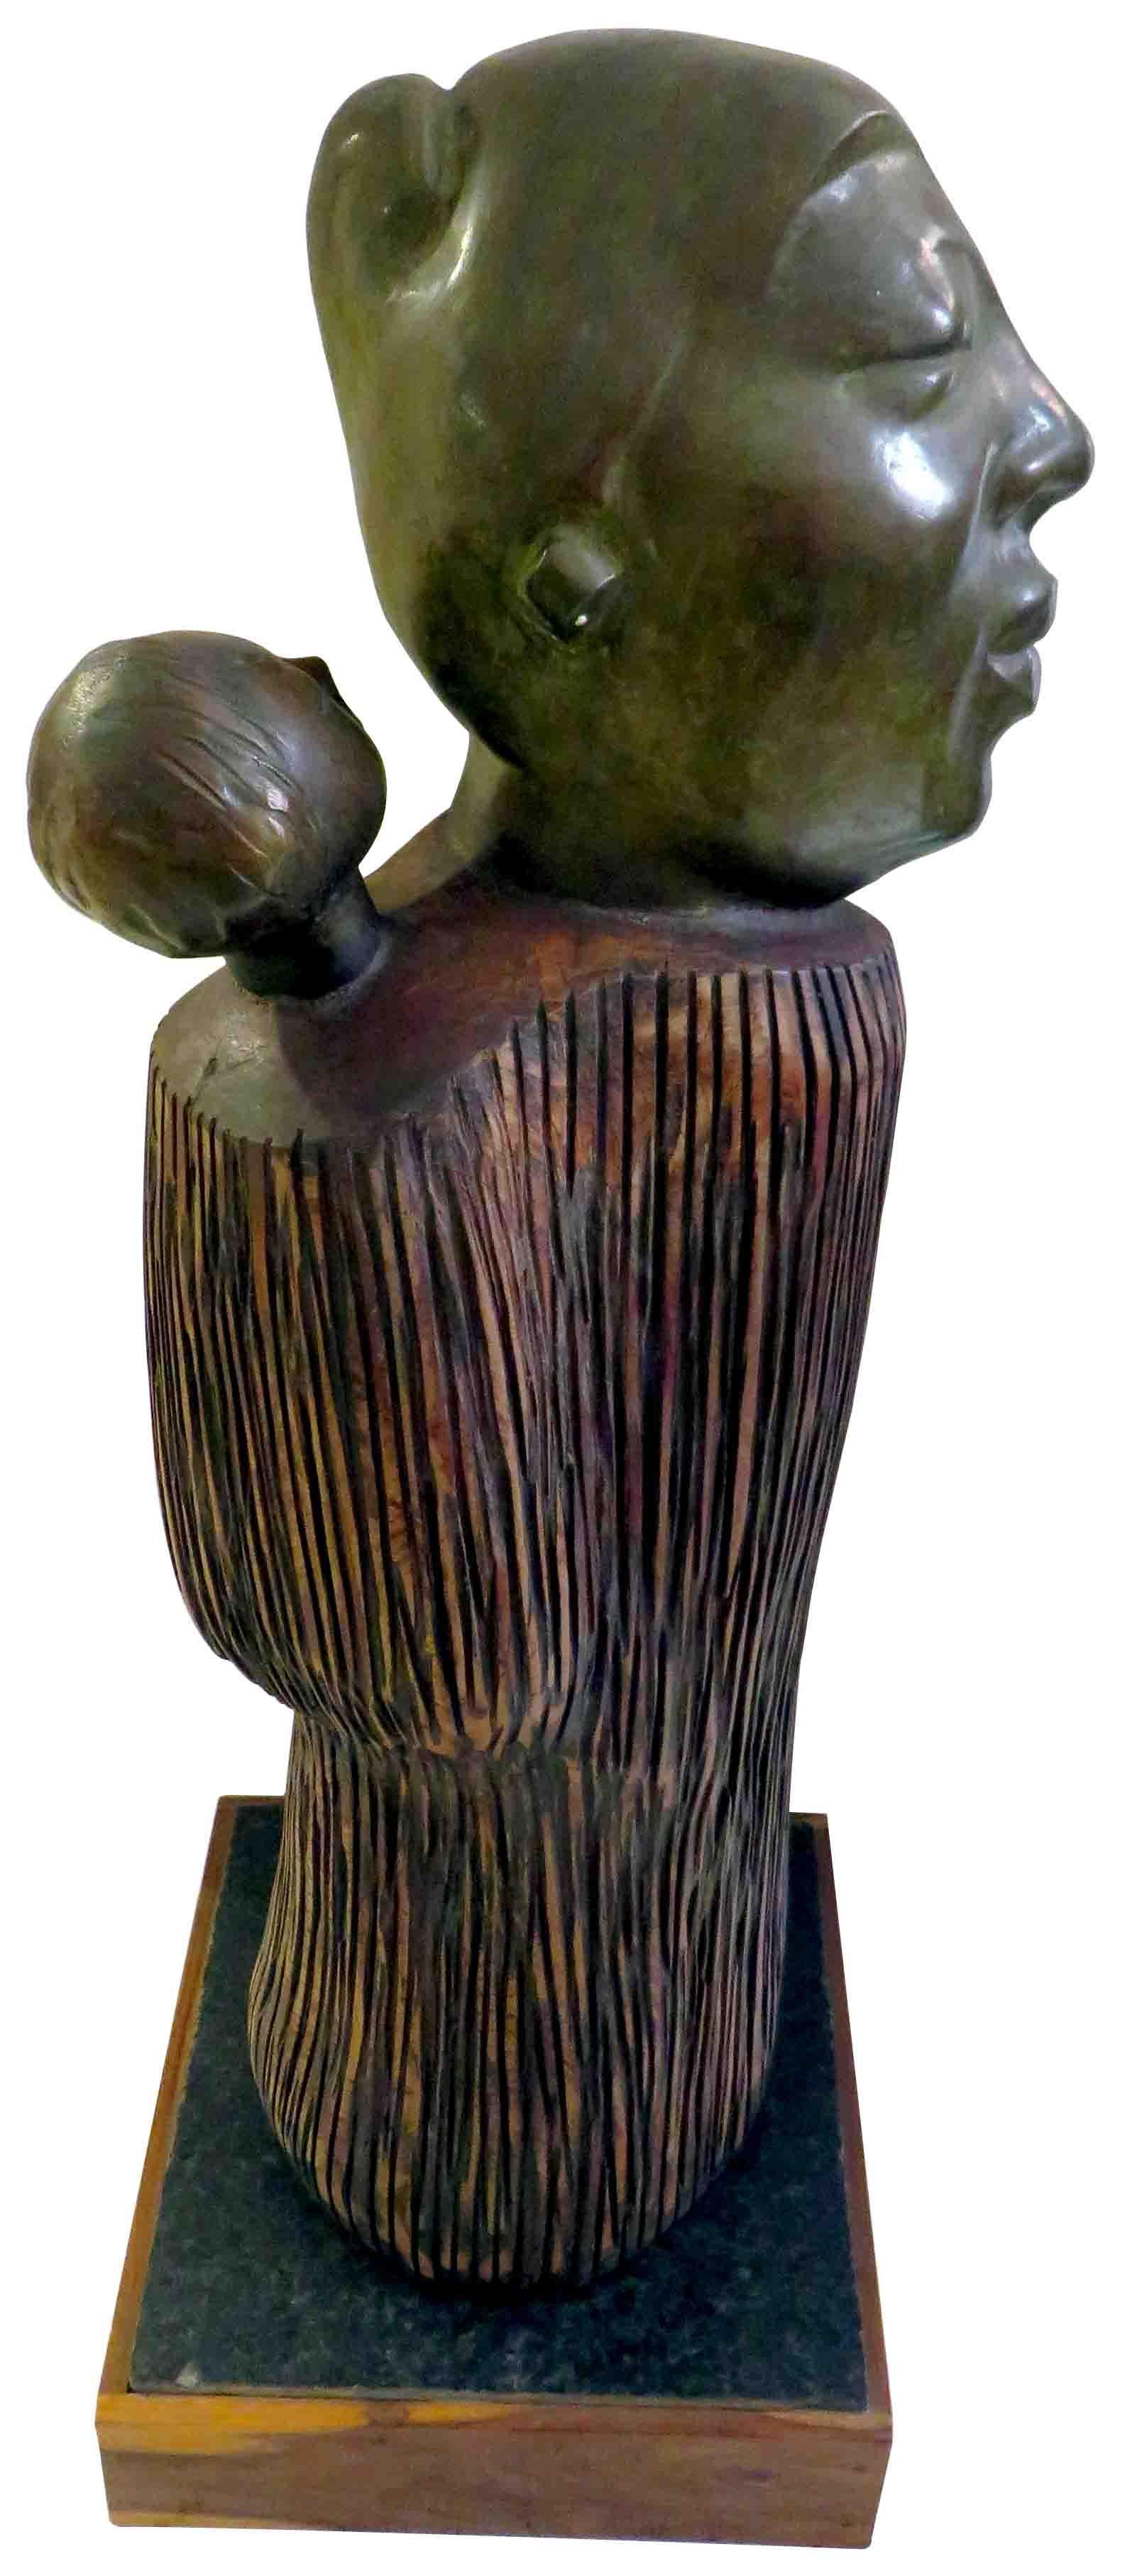 Sunil Kumar Das - A burden I Love to carry - 27 x 11 x 3 inches
Wood & Bronze. Single Edition.

Sunil Kumar Das’s Bronze & Wood also evokes in an innovative formal handling a grave looking tribal mother with her baby snugly pouched on her